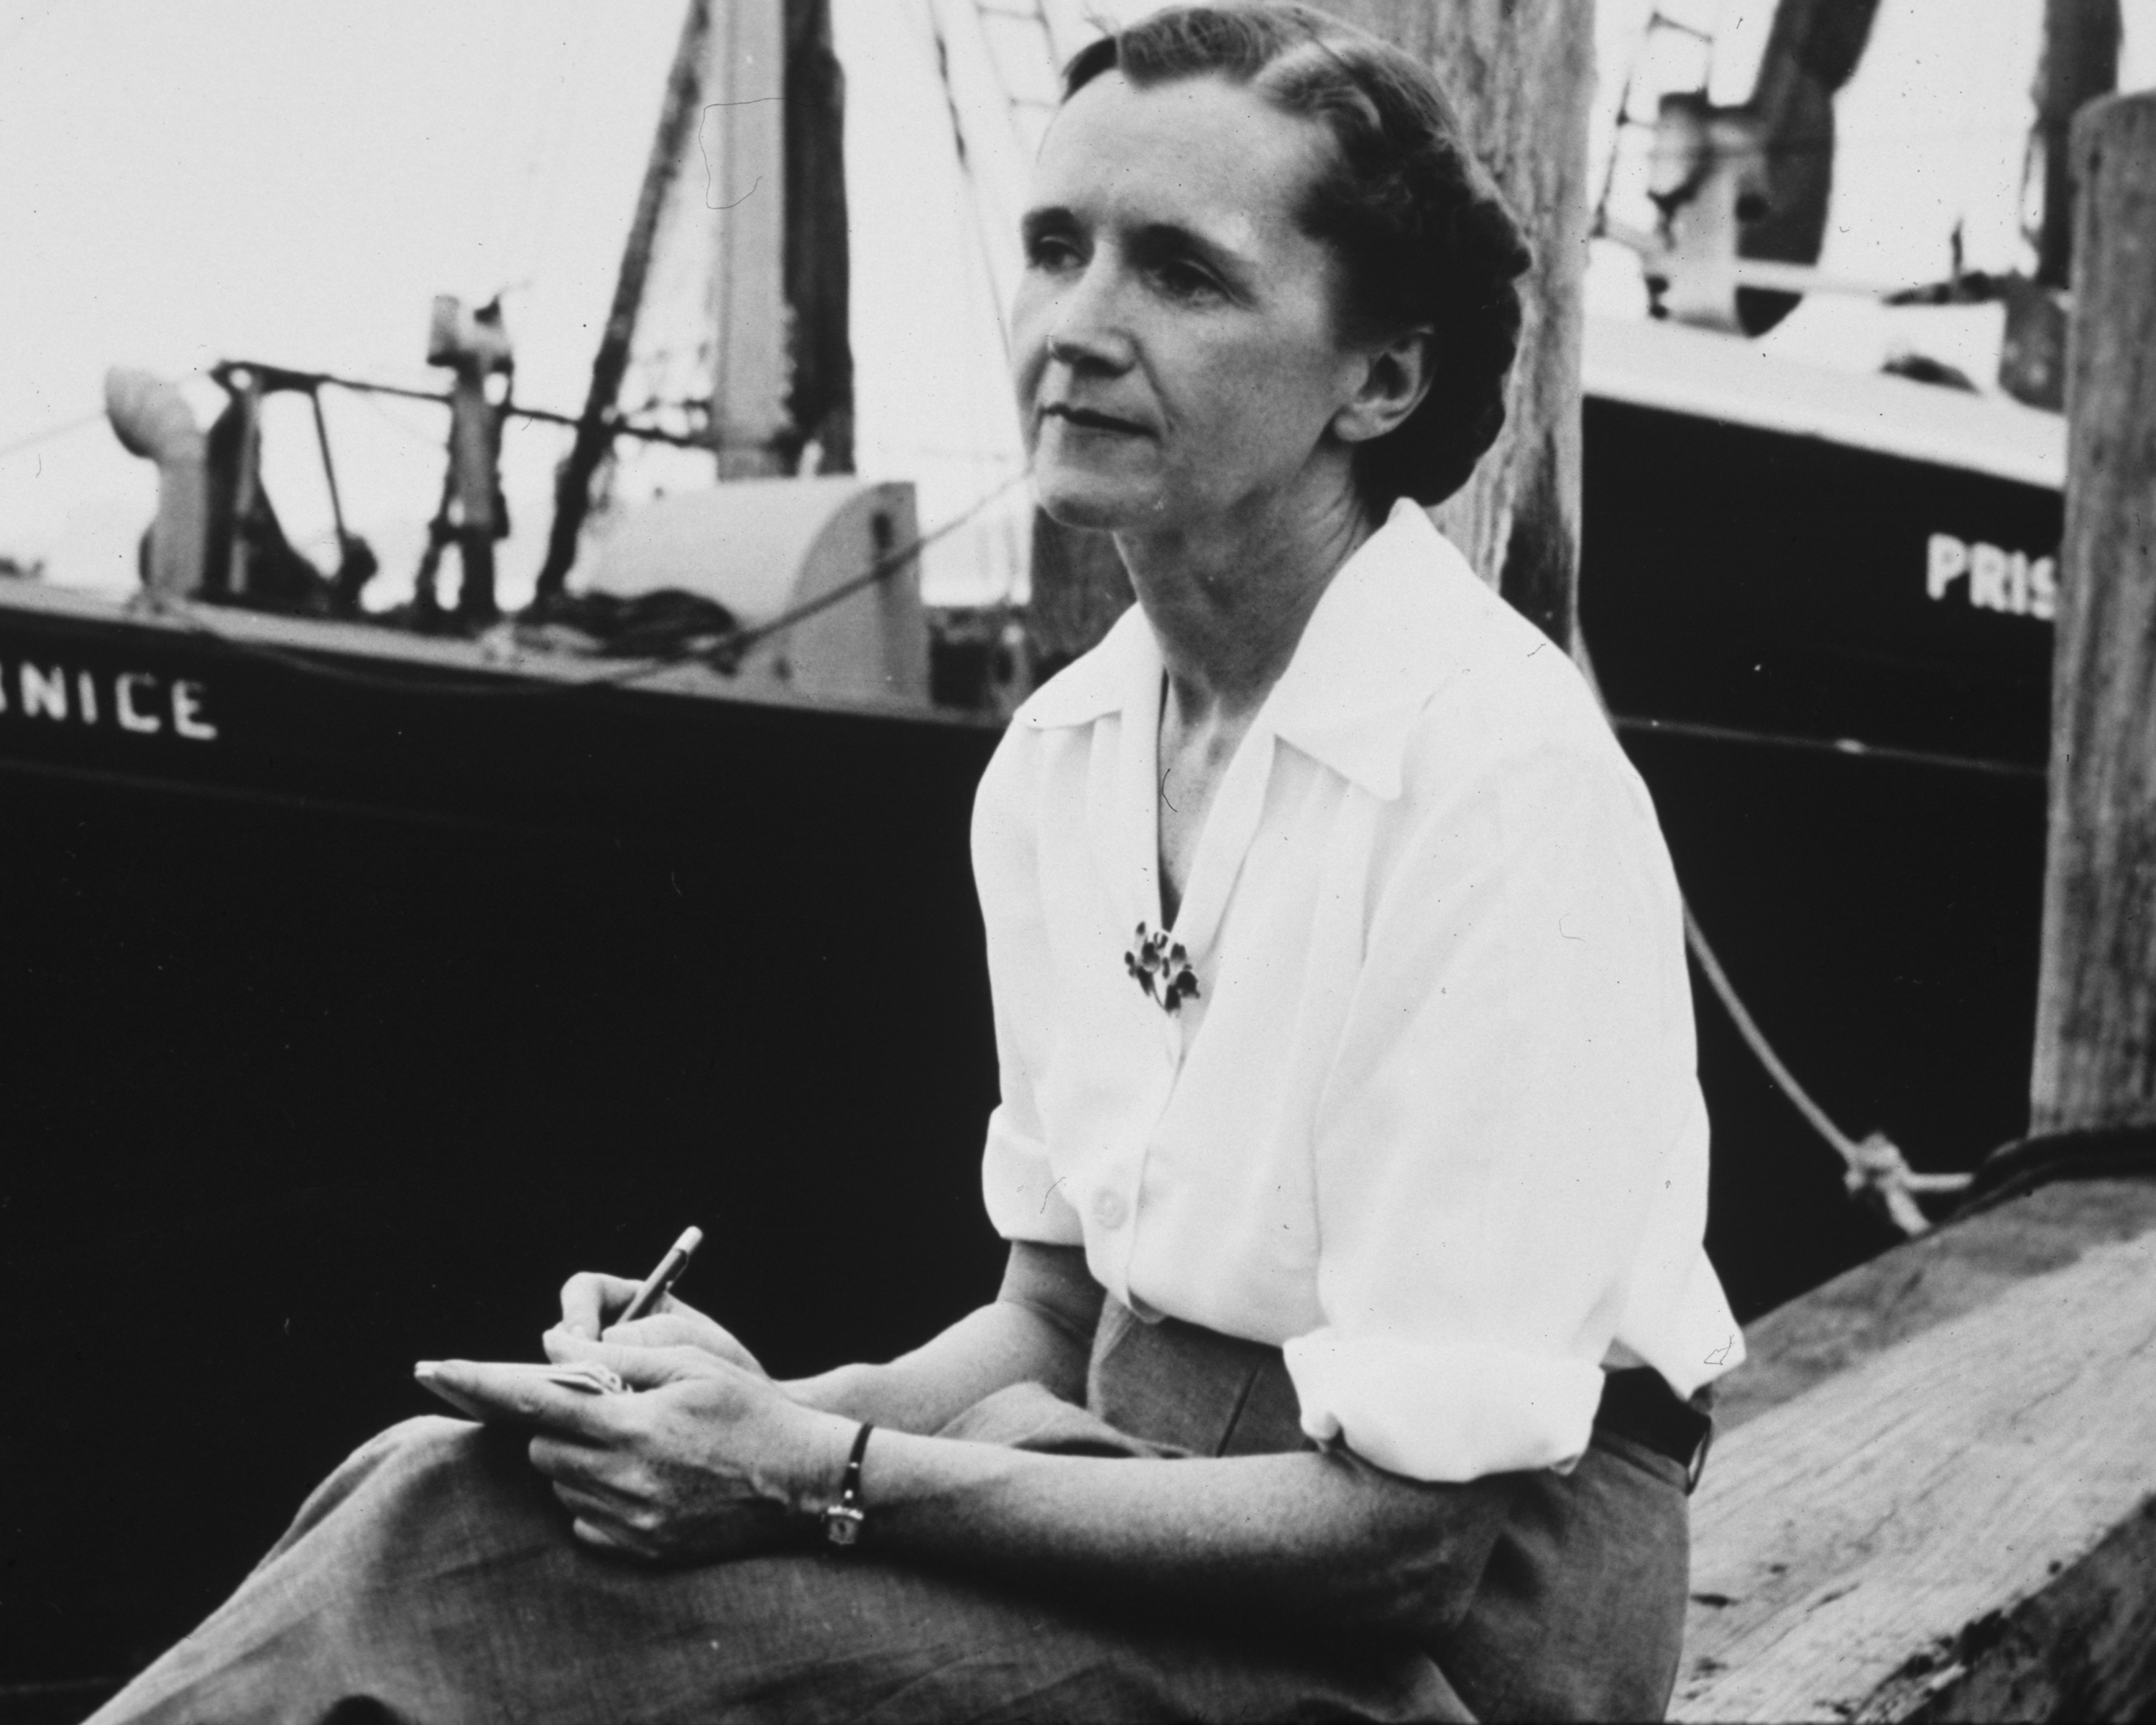 An older Rachel Carson looks pensive as she sits near a ship, with a book in her lap.